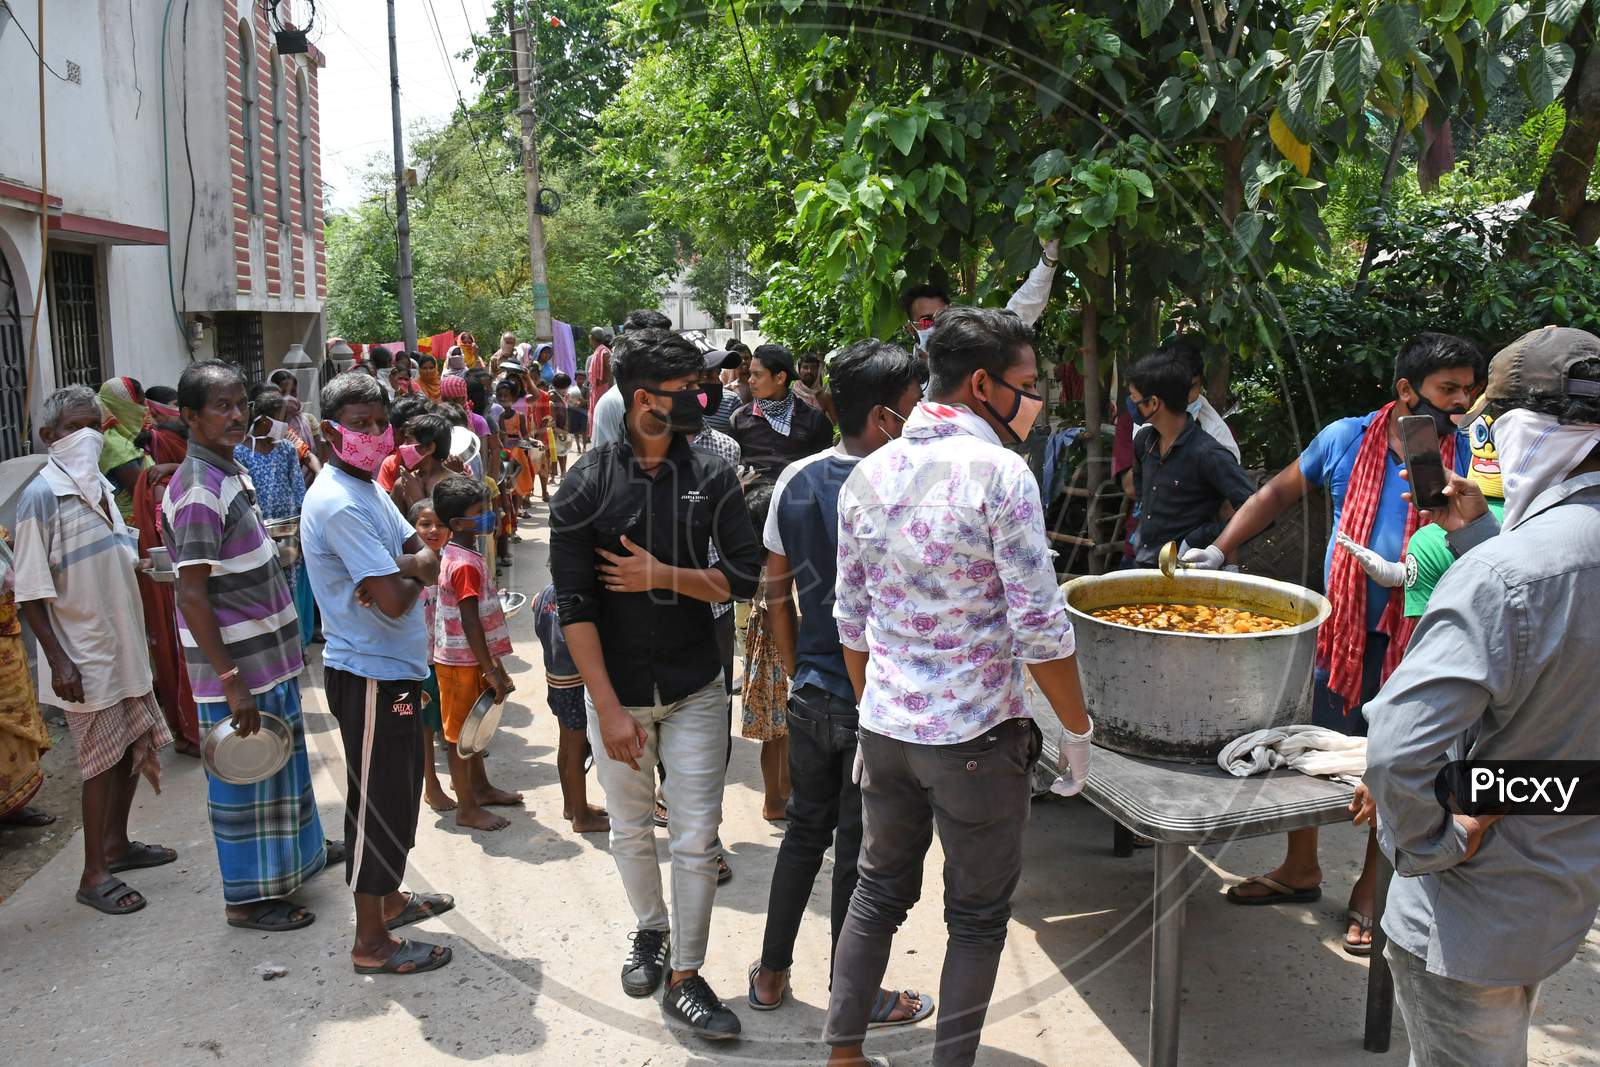 Cooked food is being given to family members who are unable to earn money due to lockdown in the emergence of Novel Coronavirus (COVID-19). At Burdwan Town.